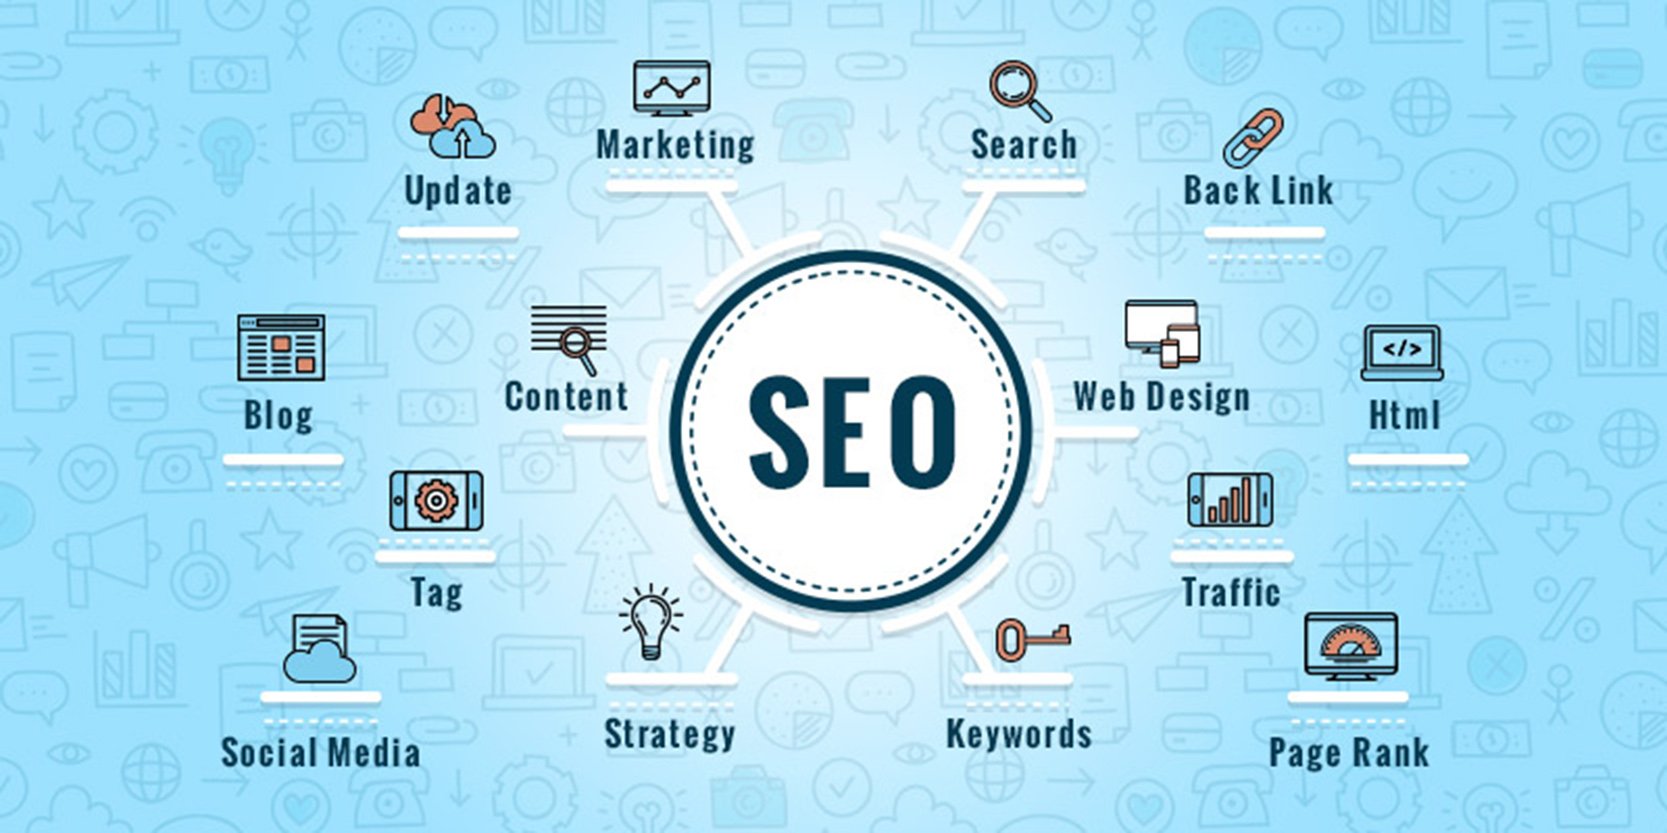 seo course in lahore, seo training in lahore, seo training in pakistan